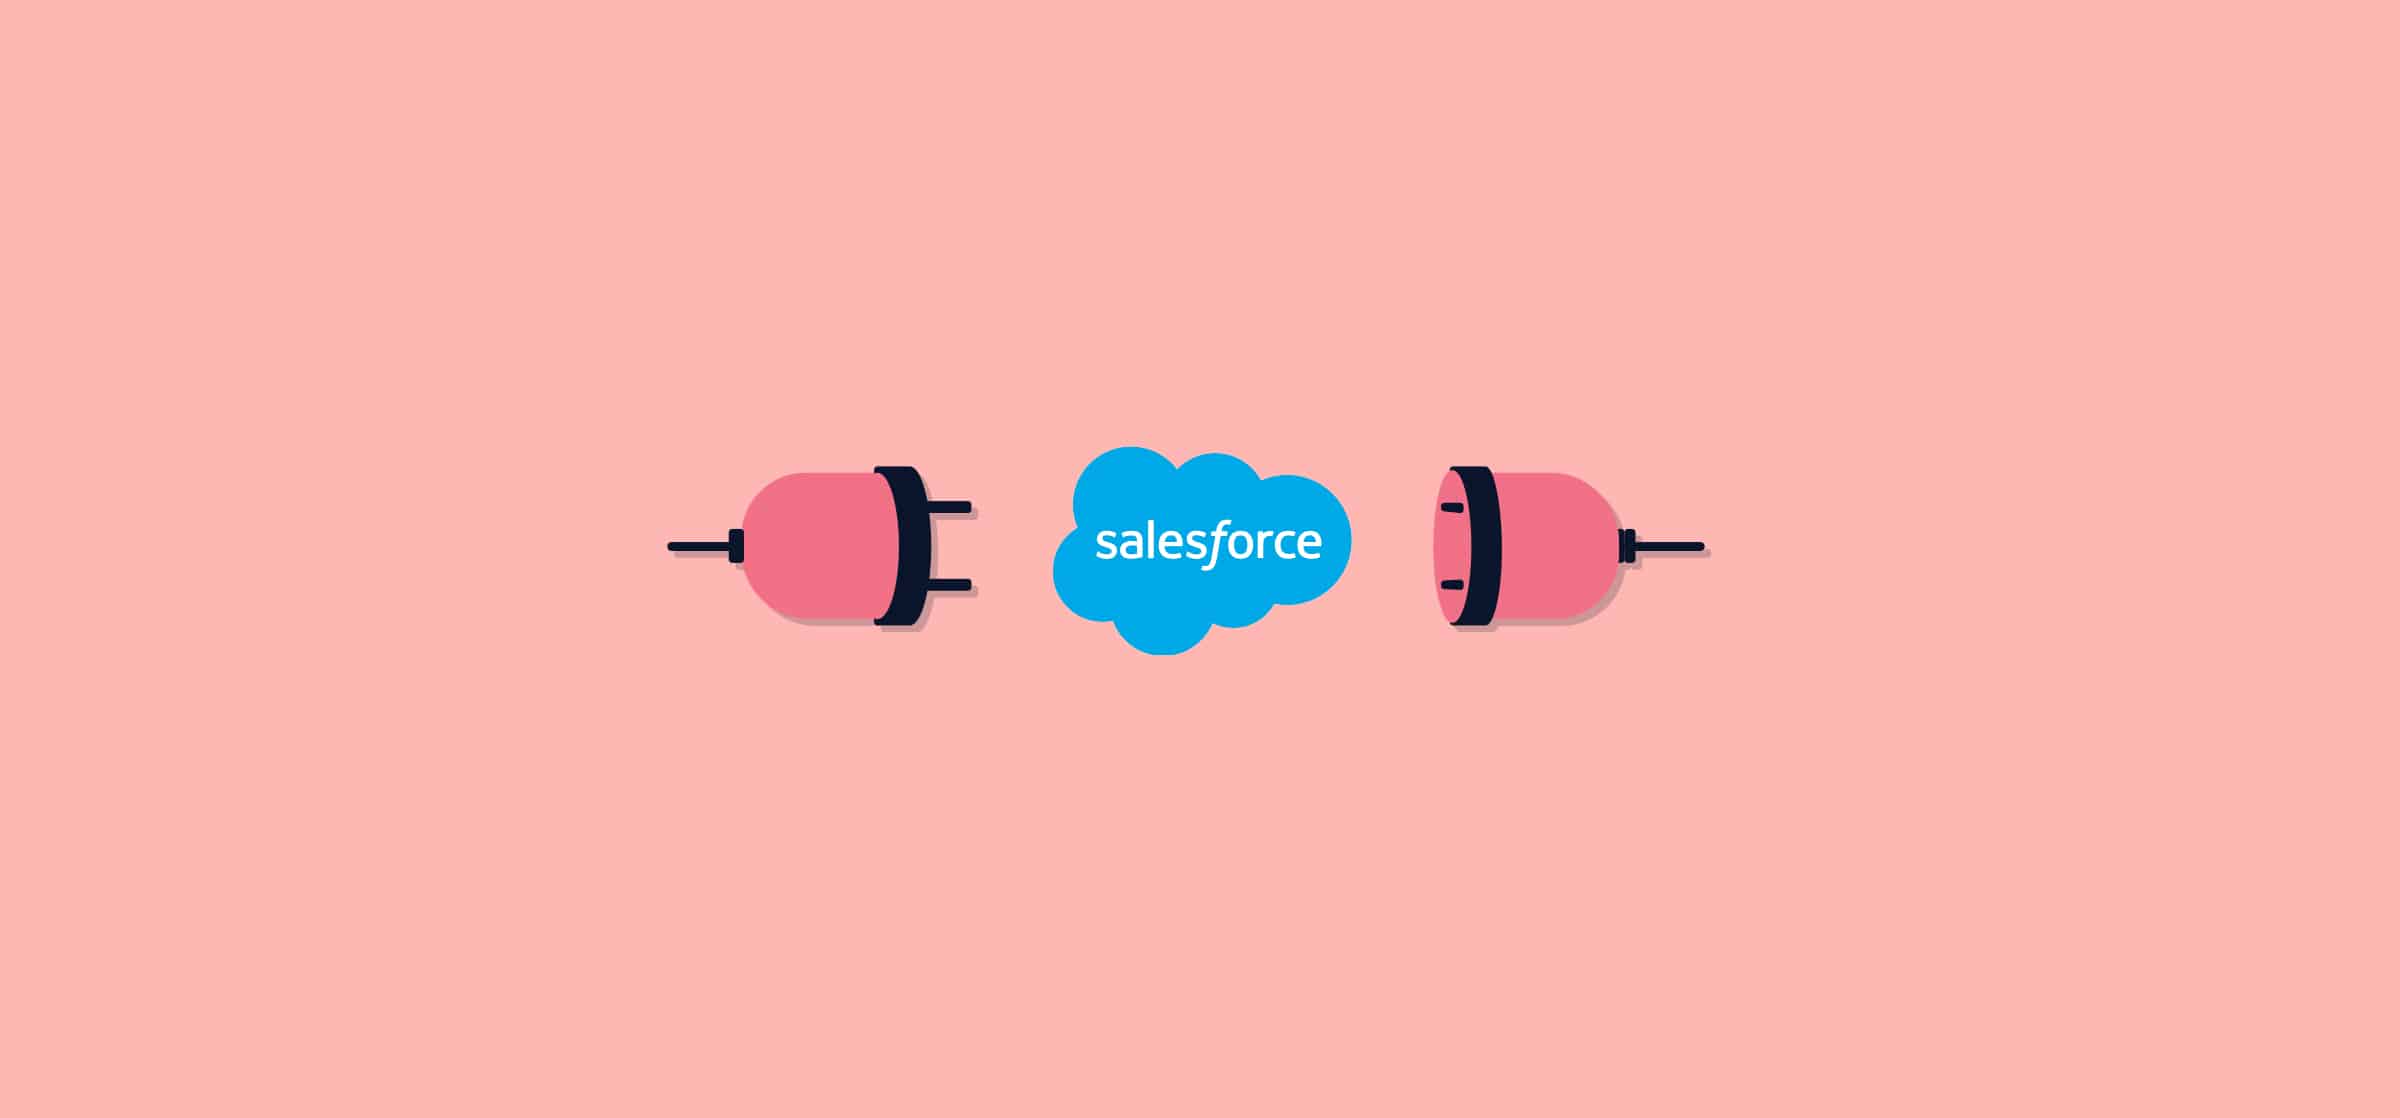 Electric plugs surrounding a Salesforce logo, representing Salesforce integrations.